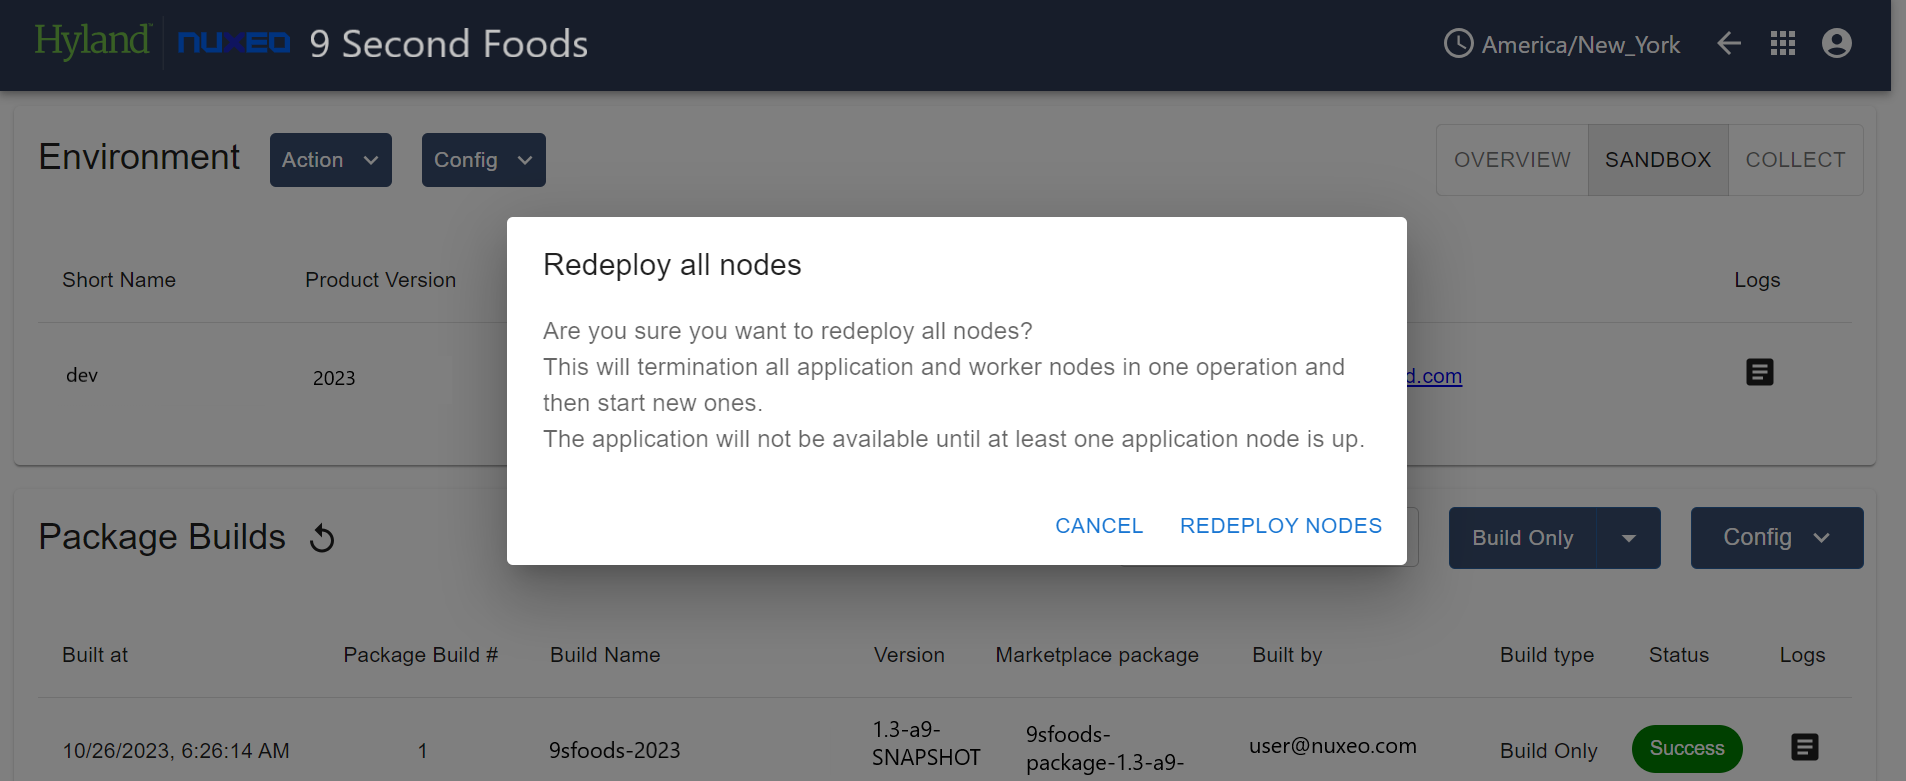 redeploy-nodes-confirmation.png